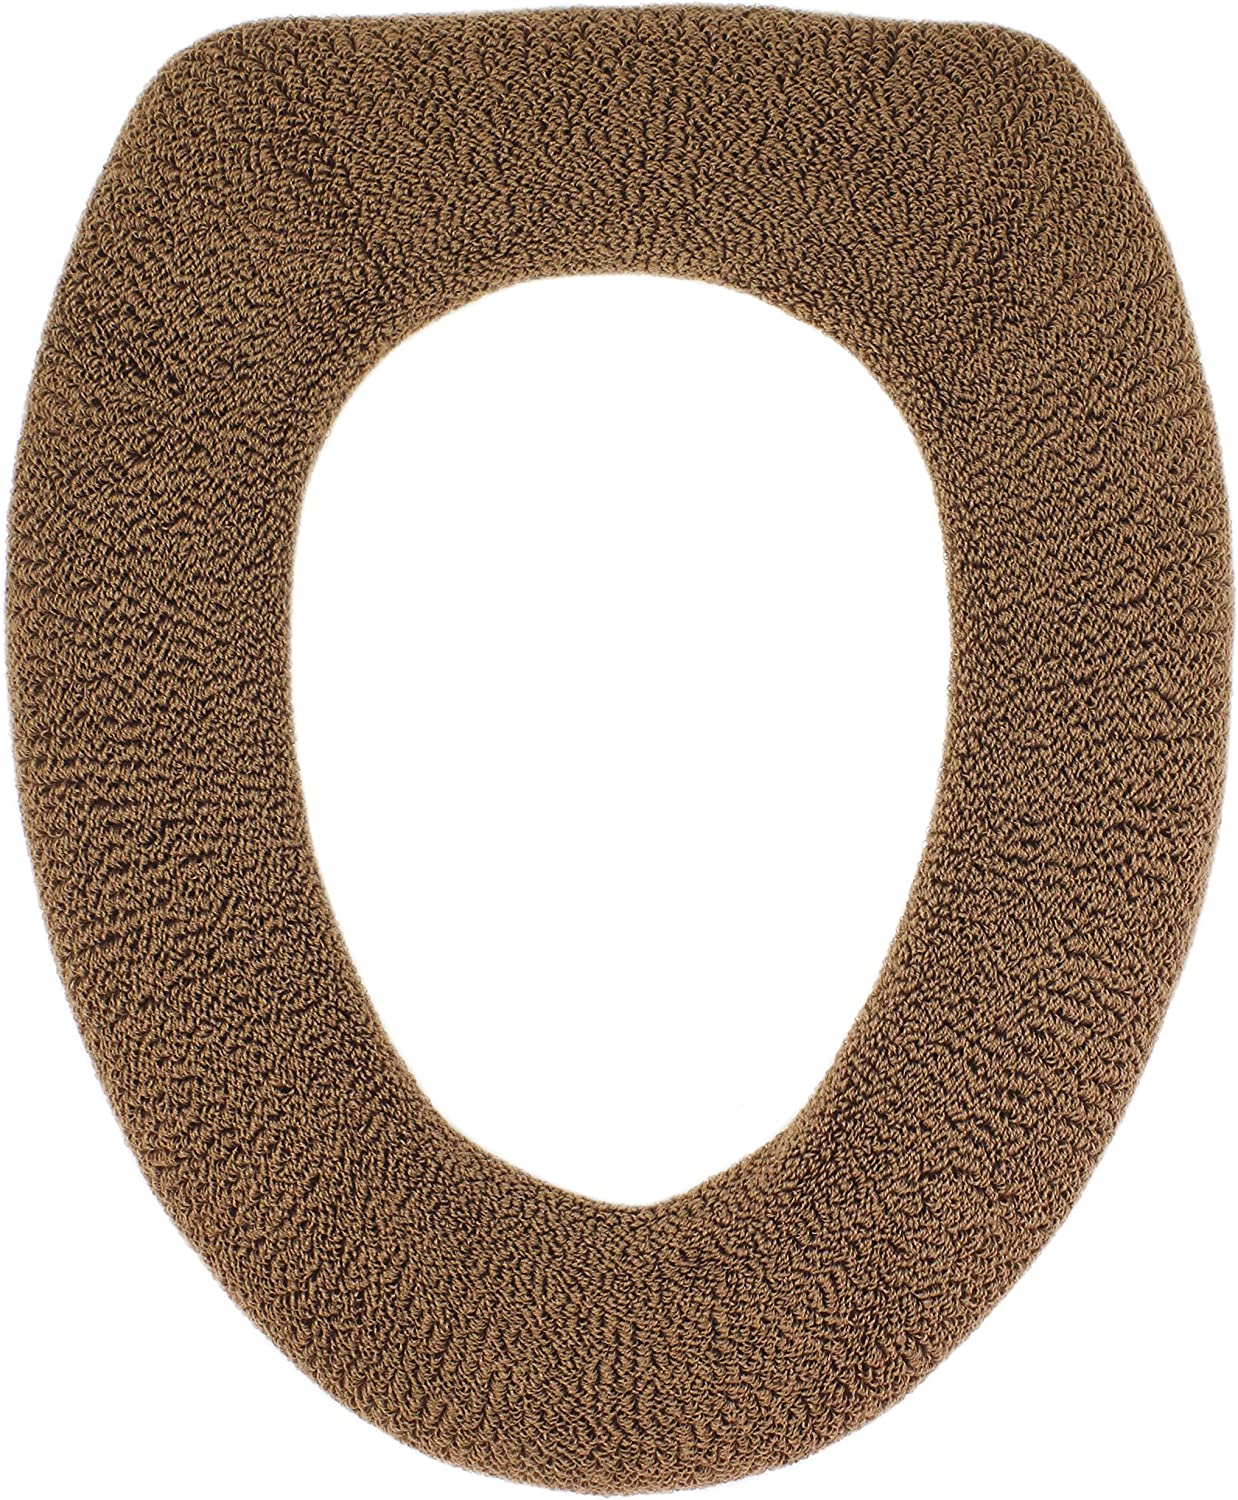 Warm-n-Comfy Snug Fit Fabric Toilet Seat Cover